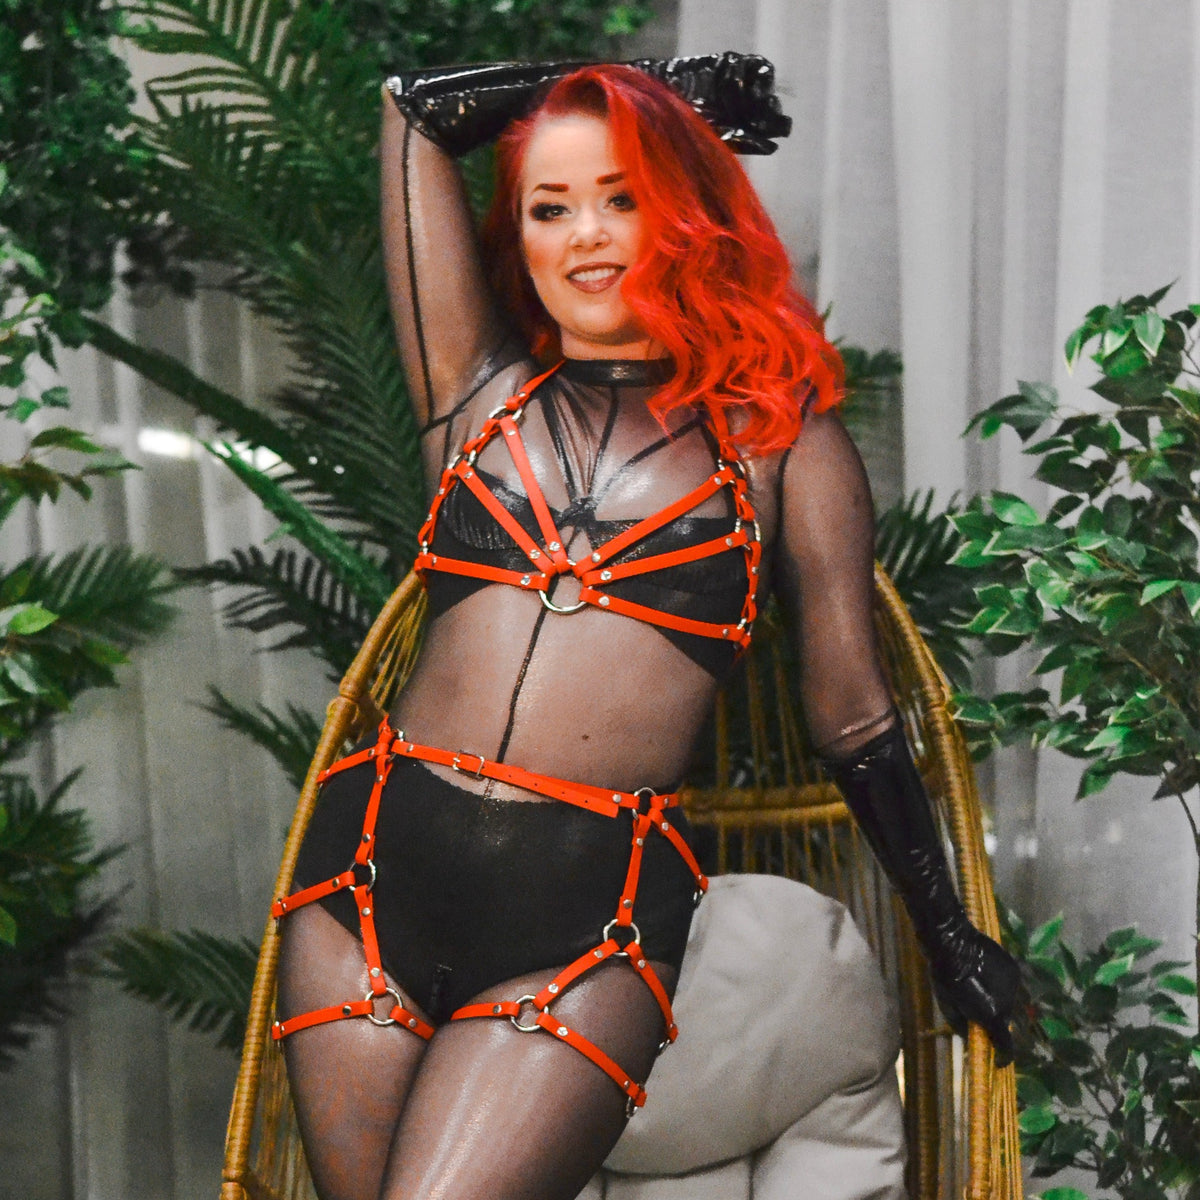 Woman with red hair wearing a black catsuit and a red thigh harness over it.